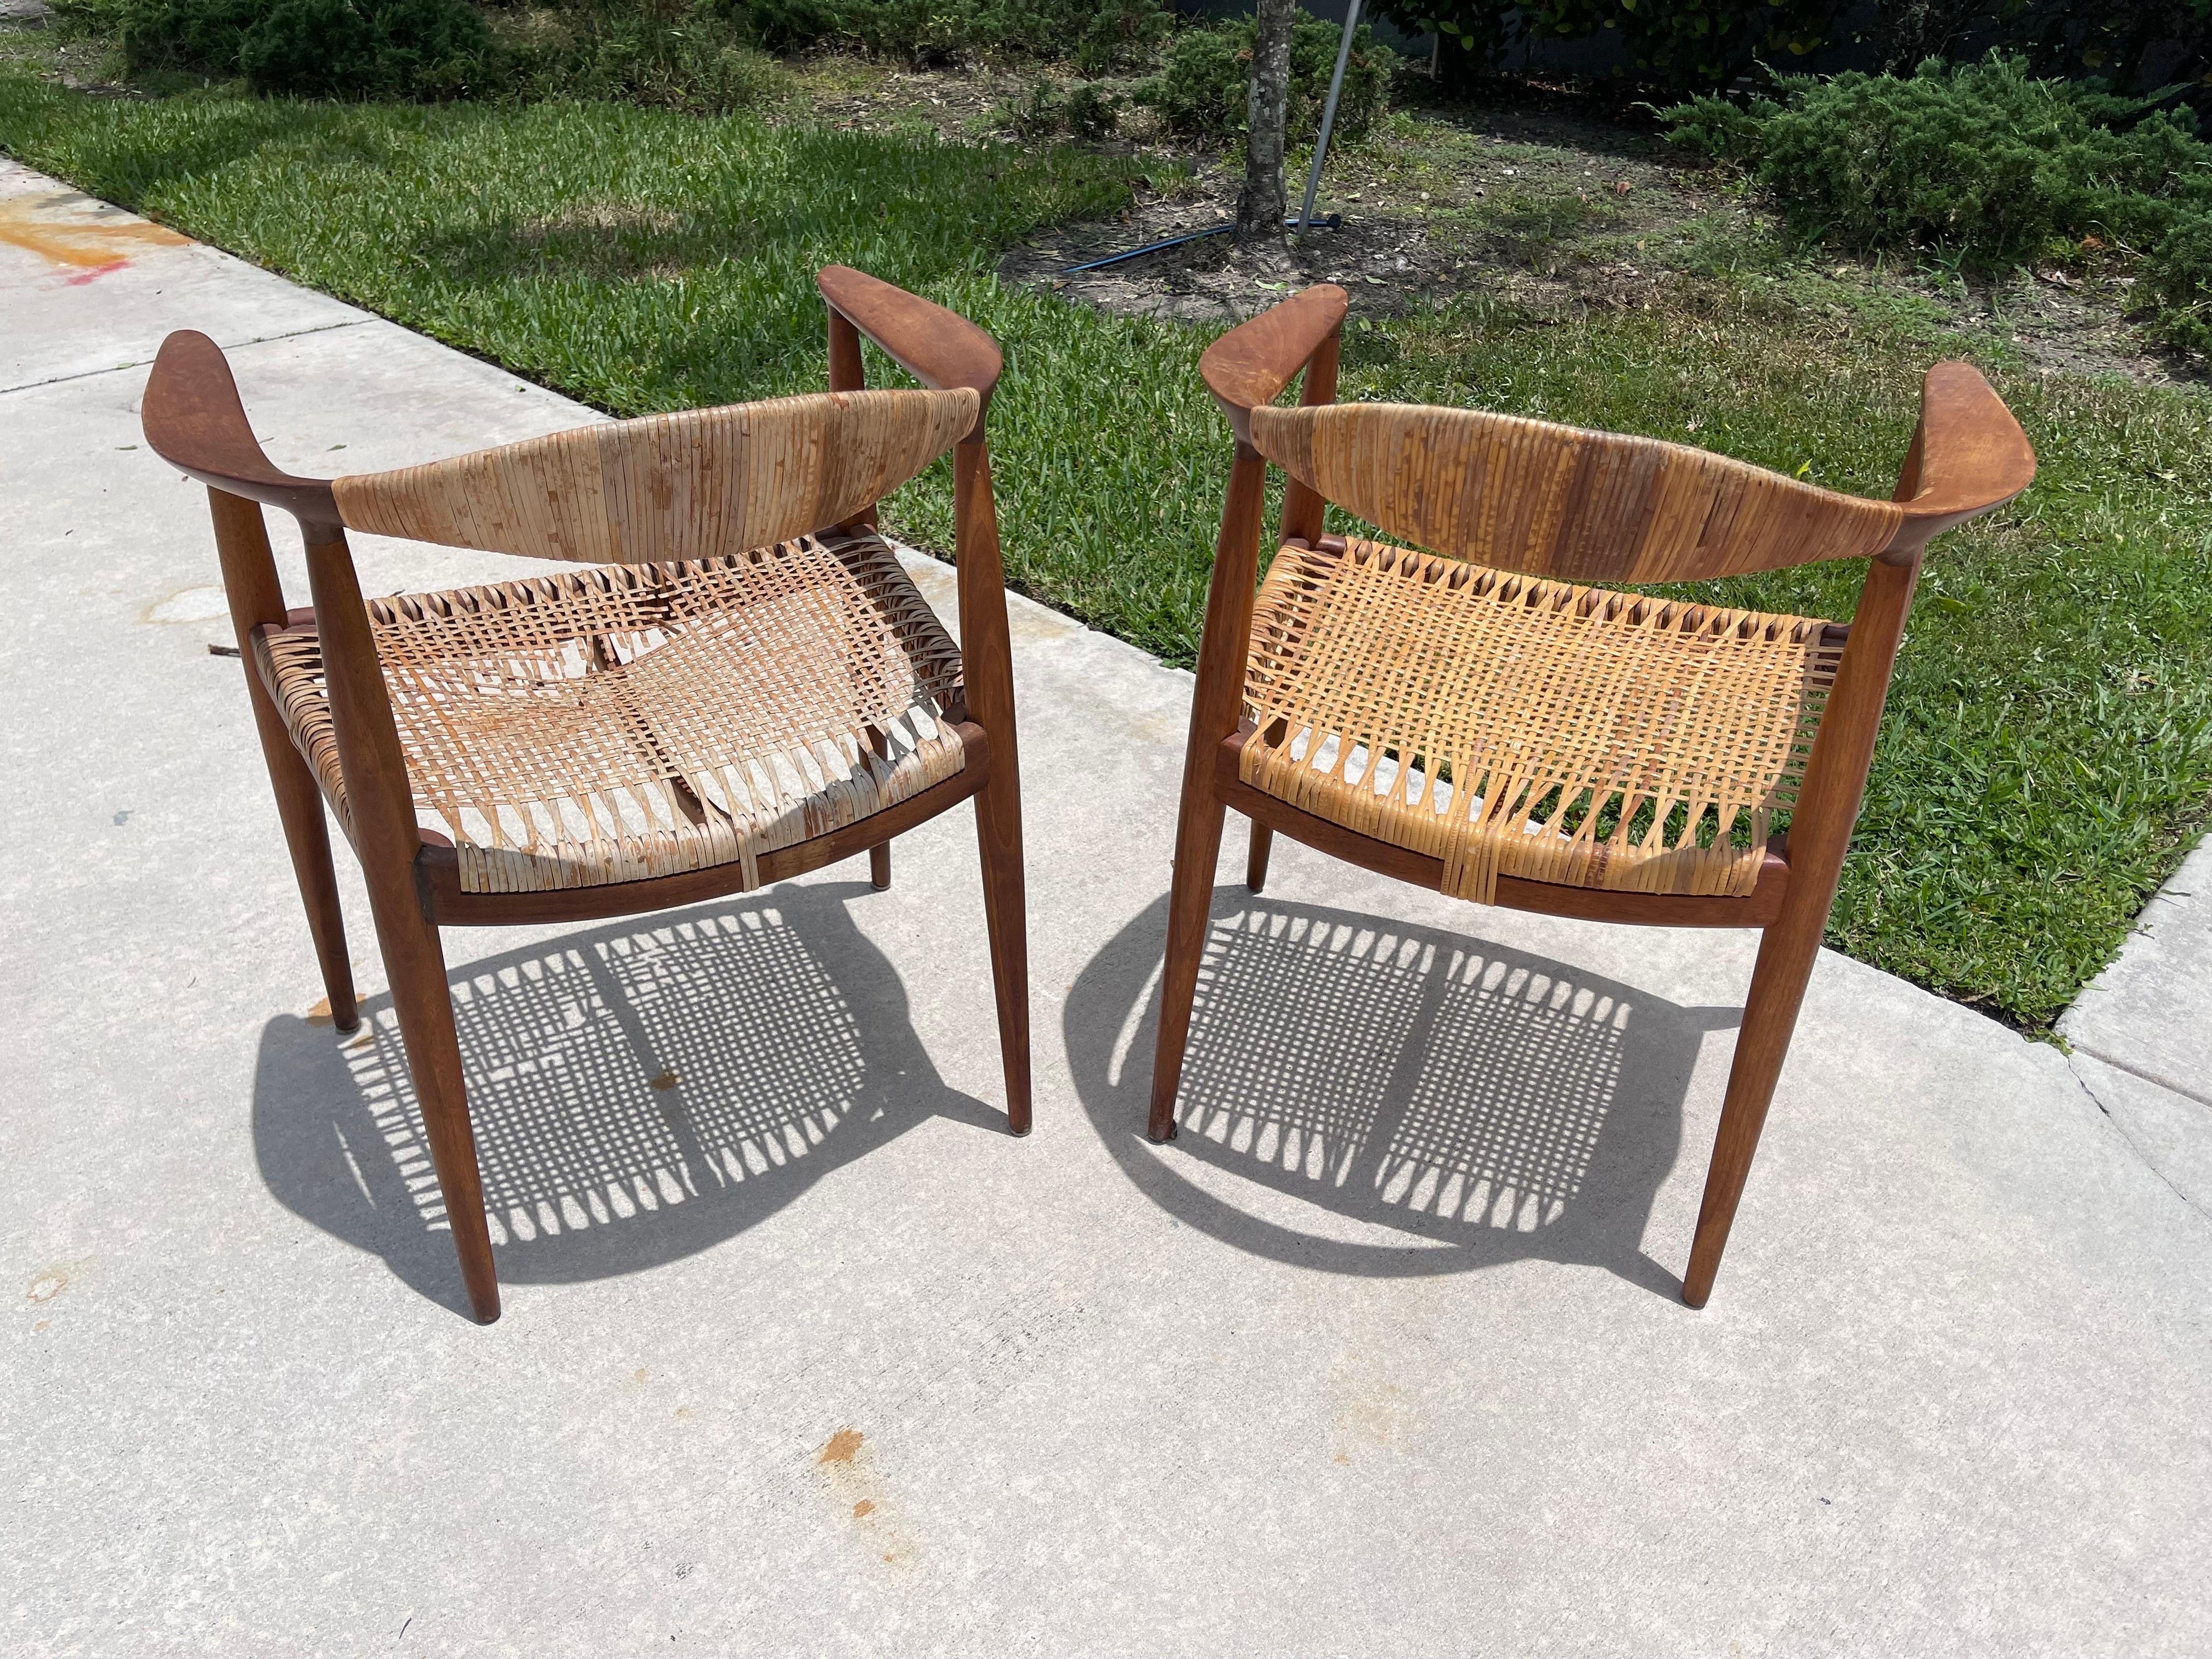 Hans Wegner “The Chair” Early Example Teak, Cane Armchairs, a Pair In Fair Condition For Sale In Jensen Beach, FL